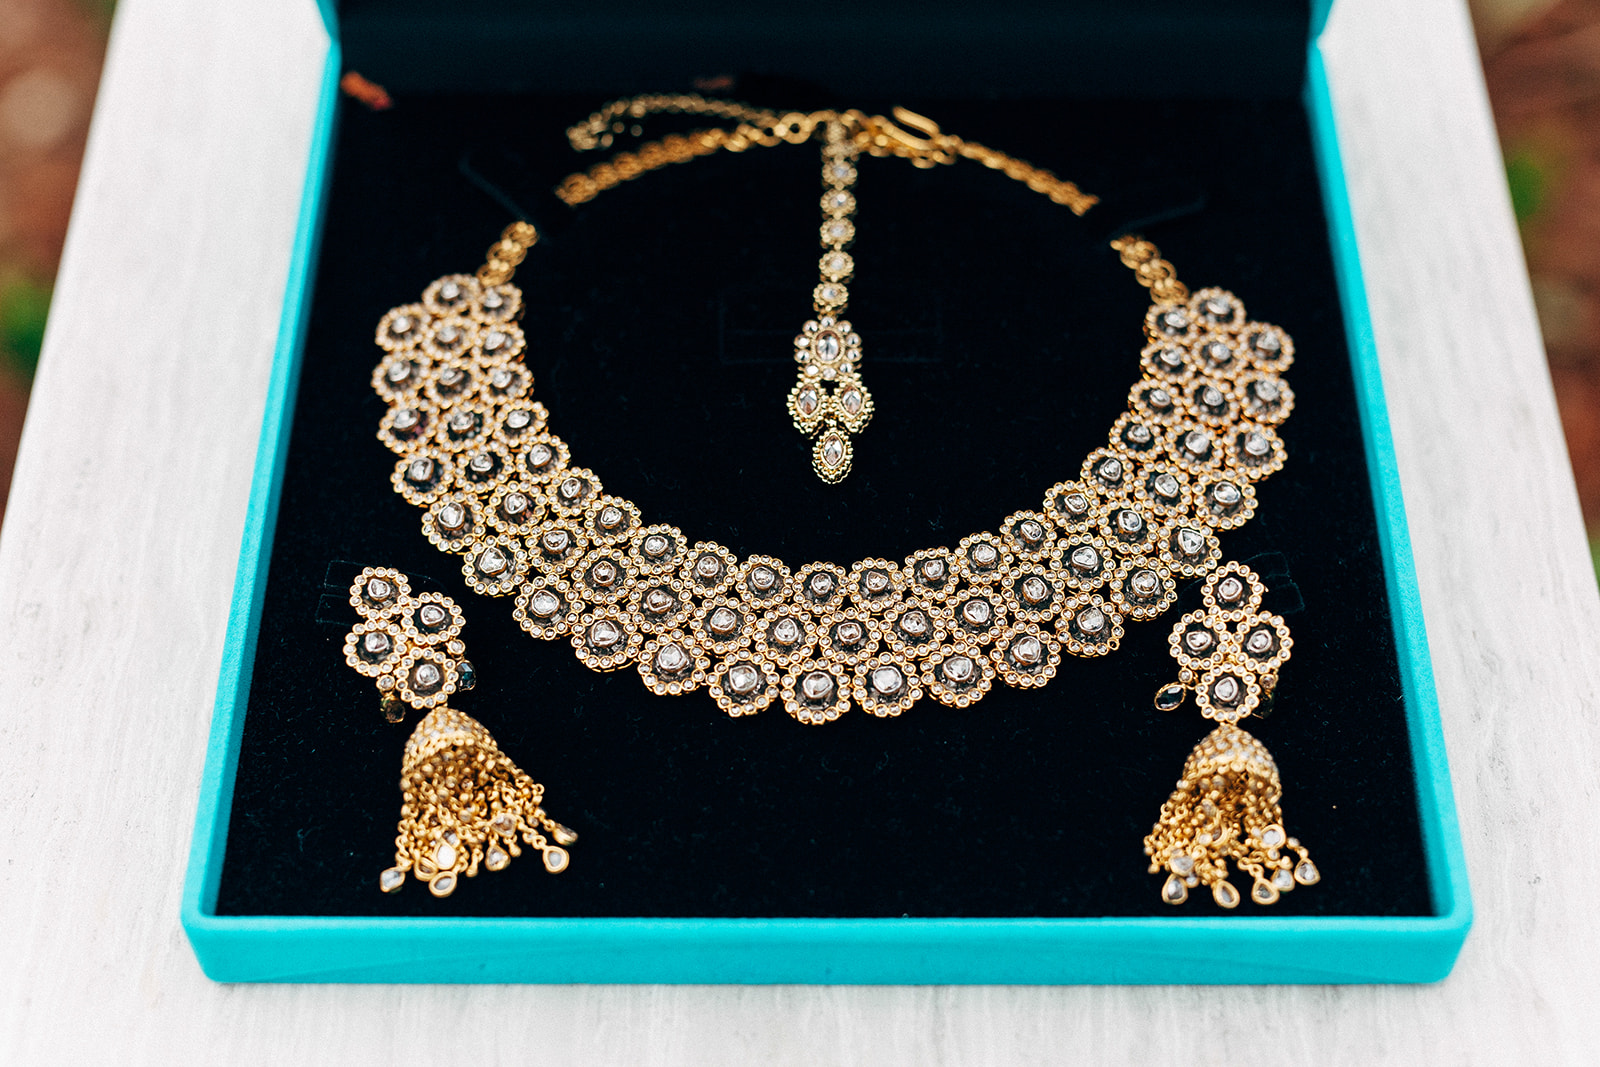 Indian gold jewelry for a wedding day